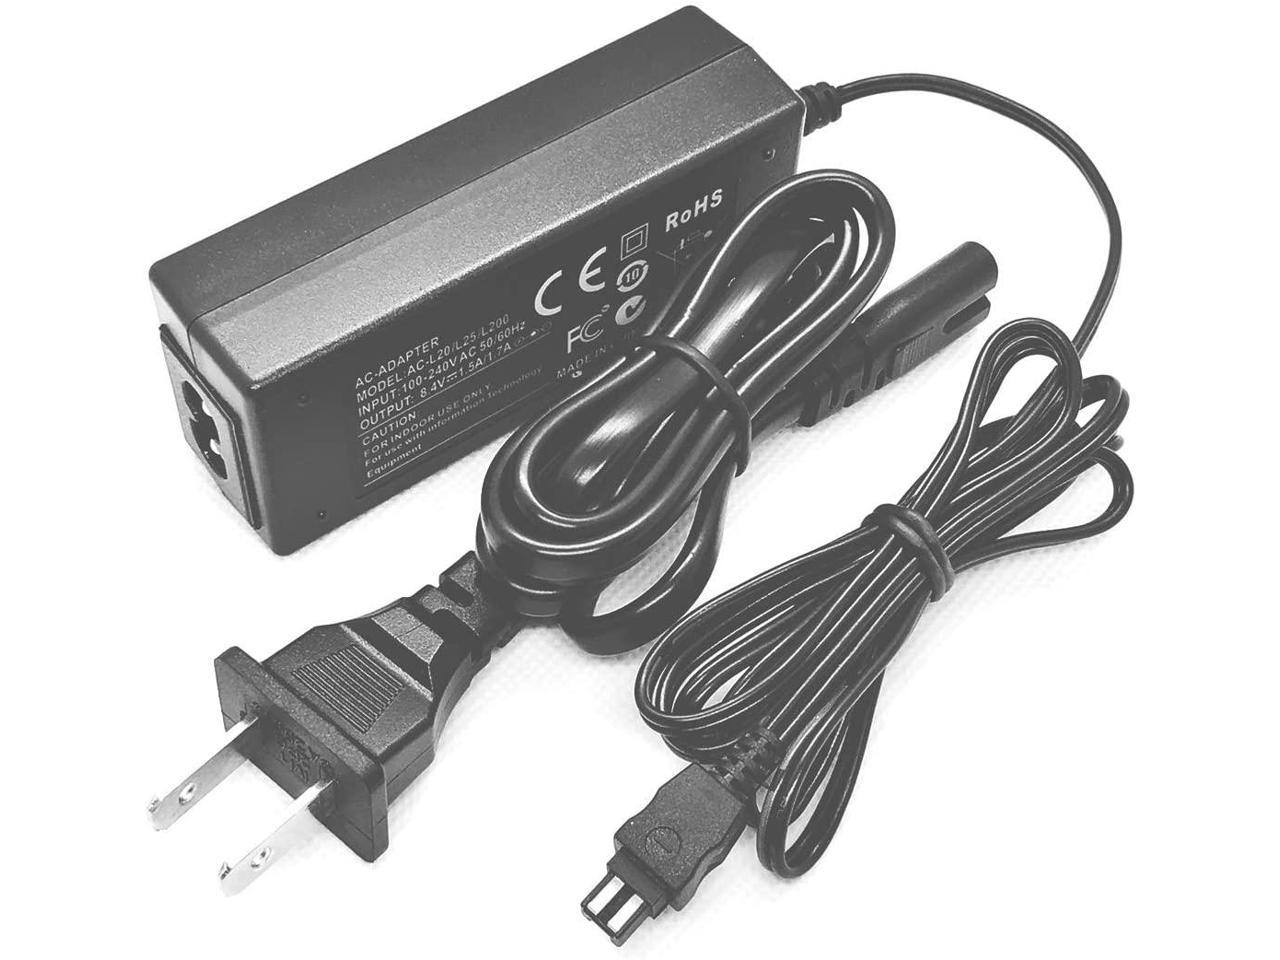 Battery Pack for Sony HDR-CX250E HDR-CX290E Handycam Camcorder HDR-CX260VE HDR-CX270VE HDR-CX280E